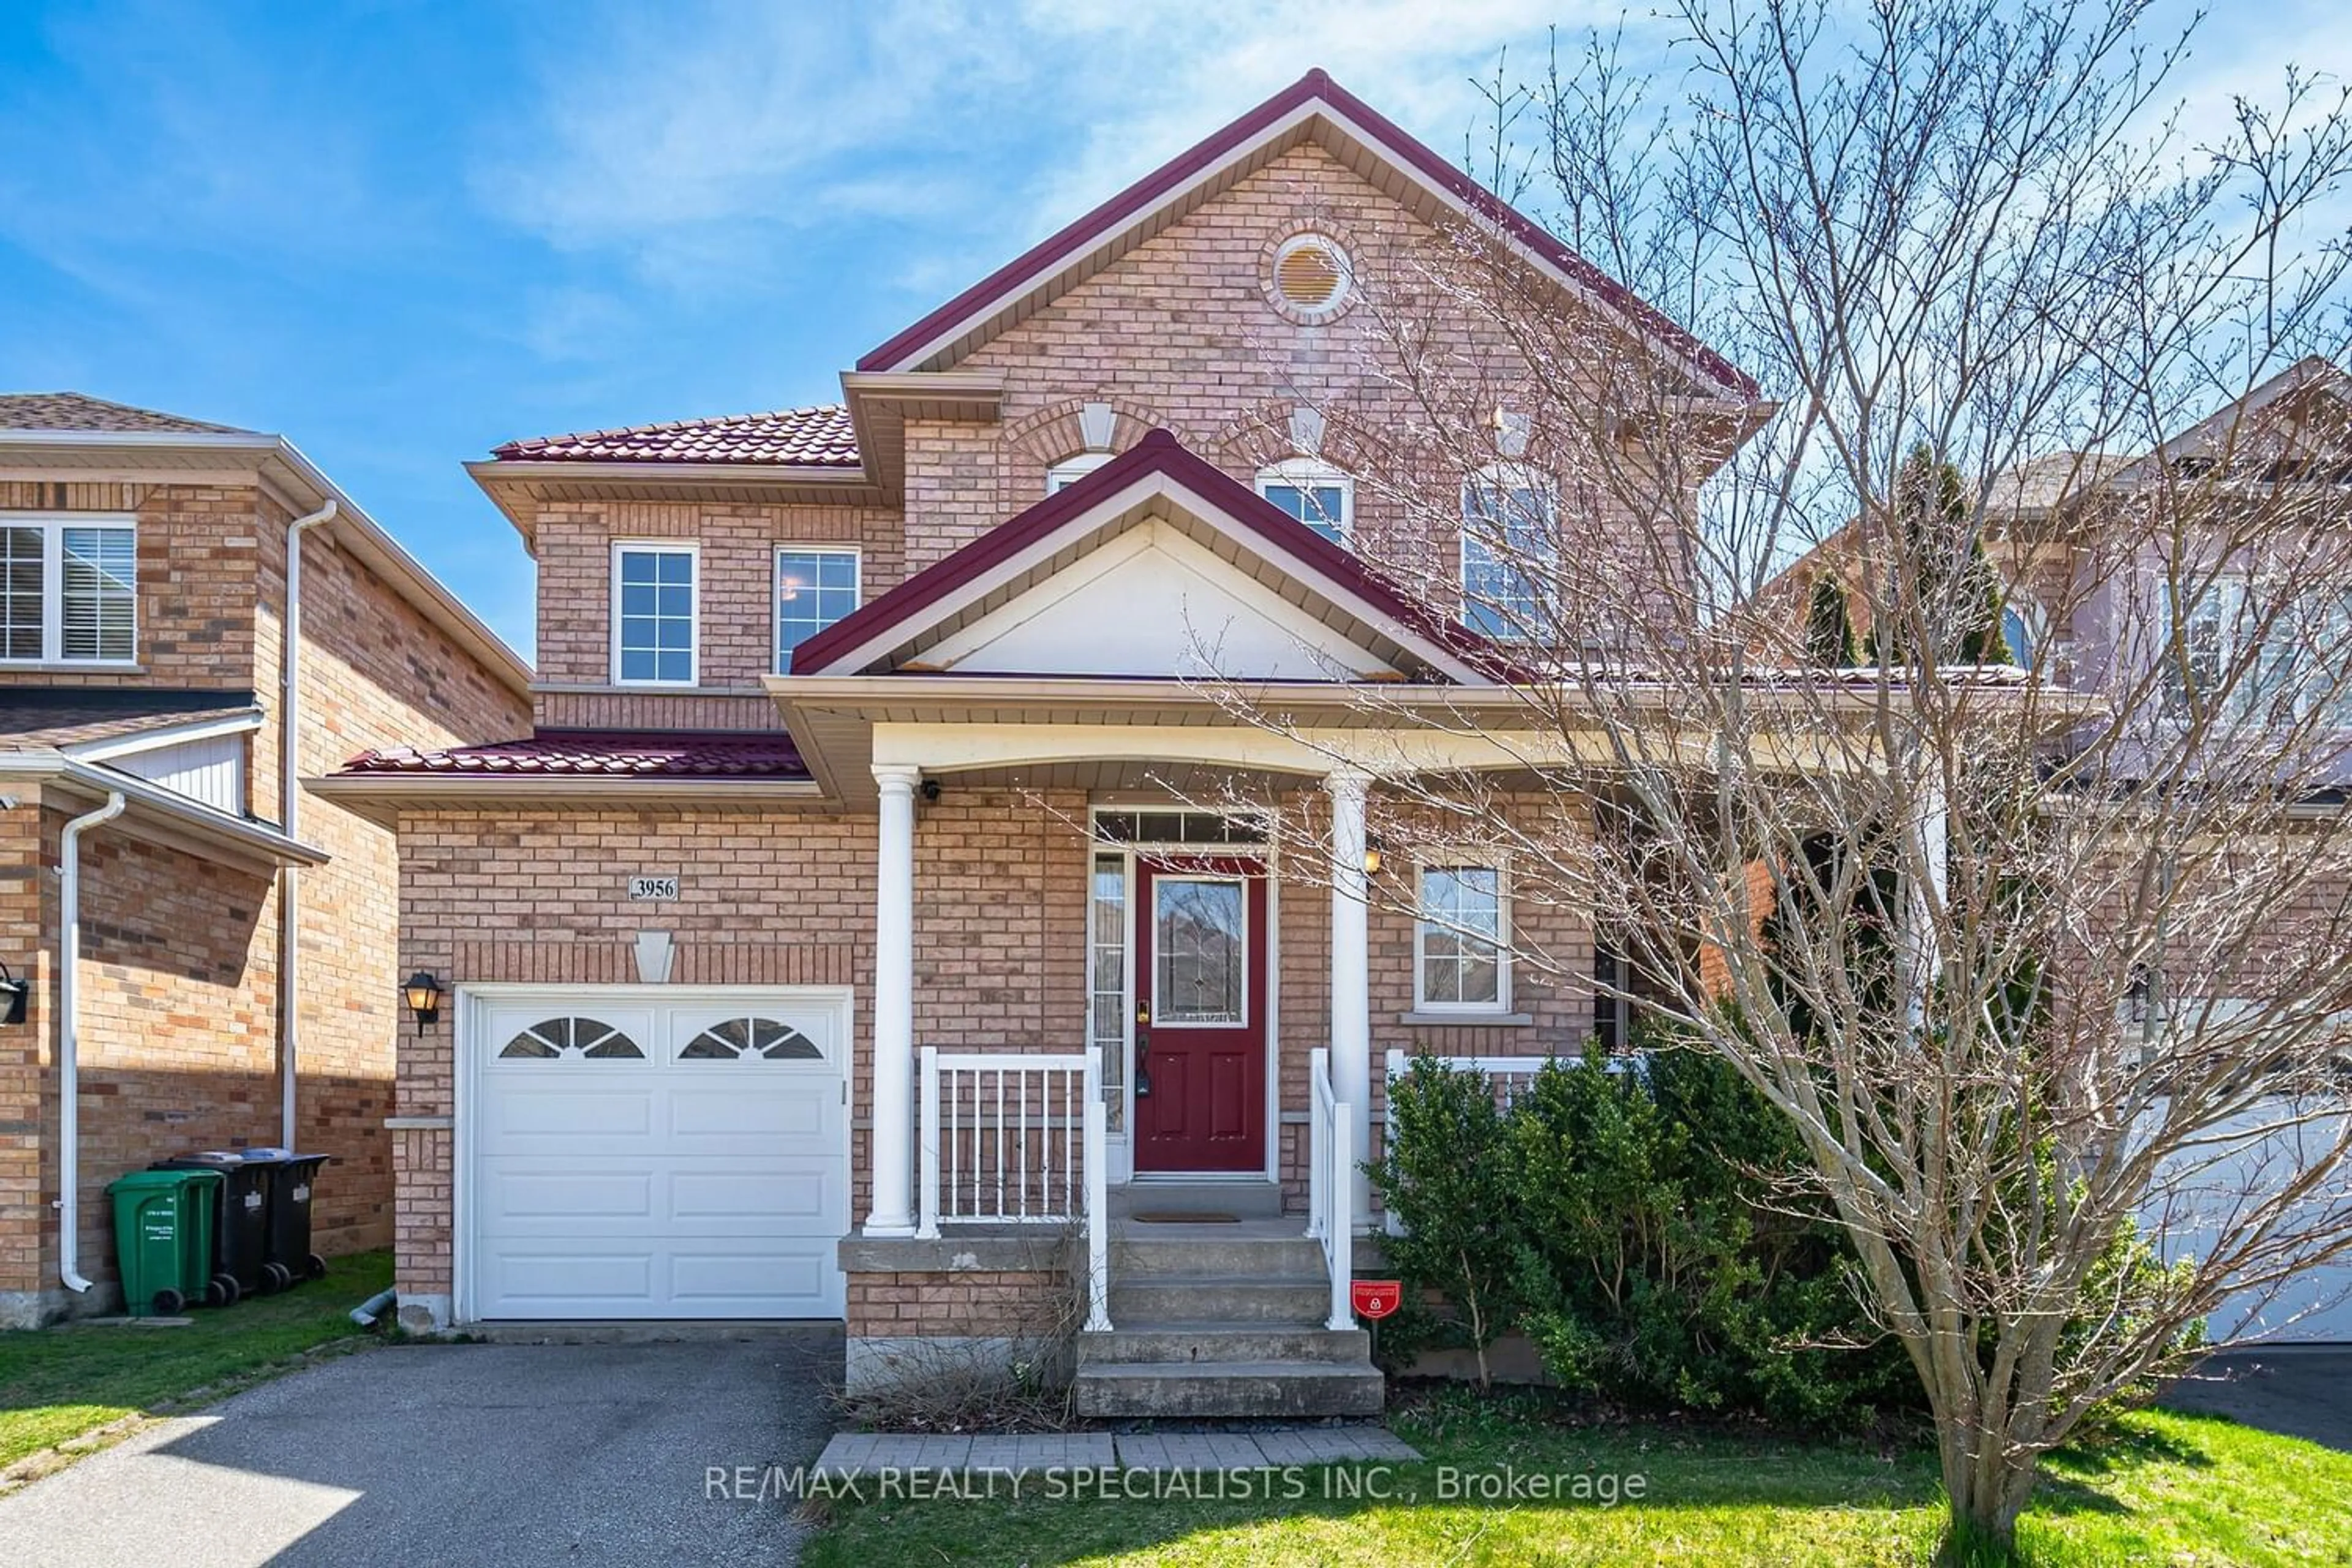 Home with brick exterior material for 3956 Tacc Dr, Mississauga Ontario L5M 6L2